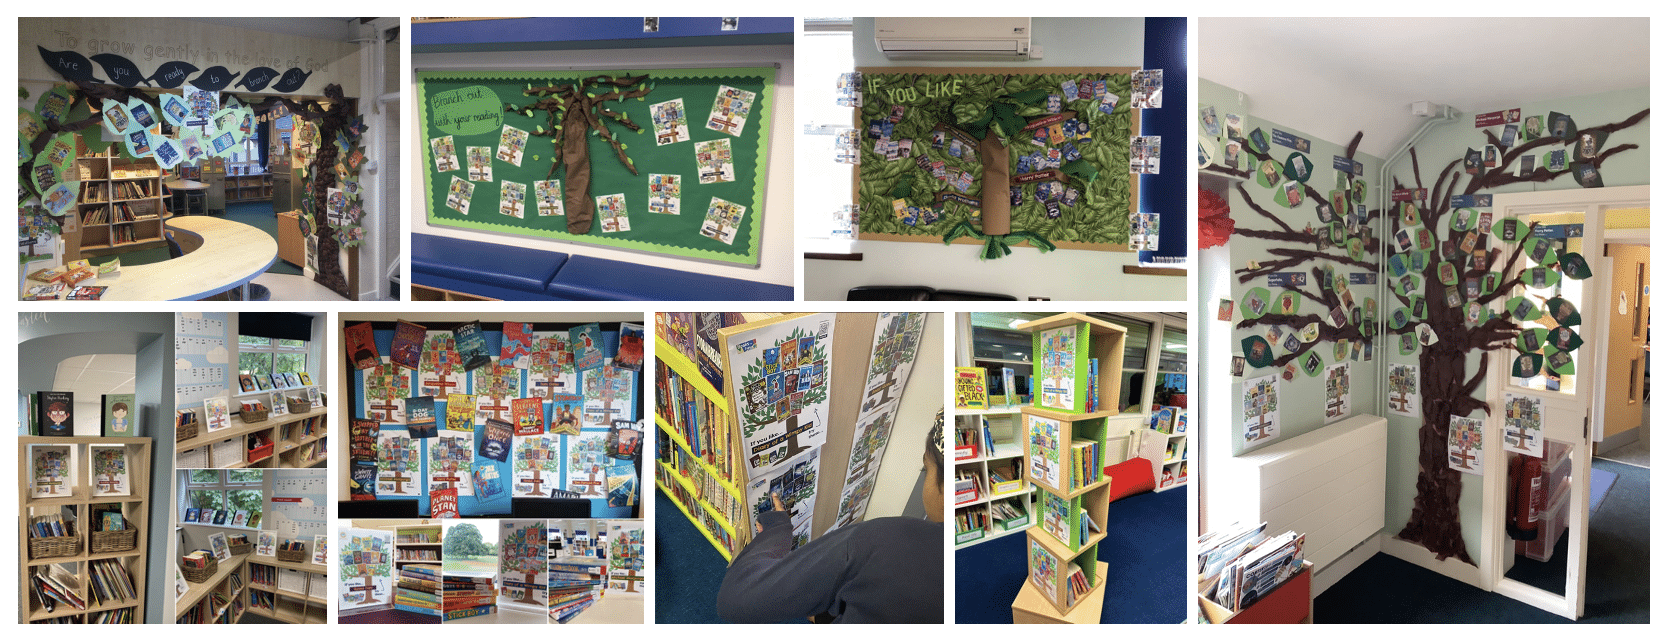 branching out school library display